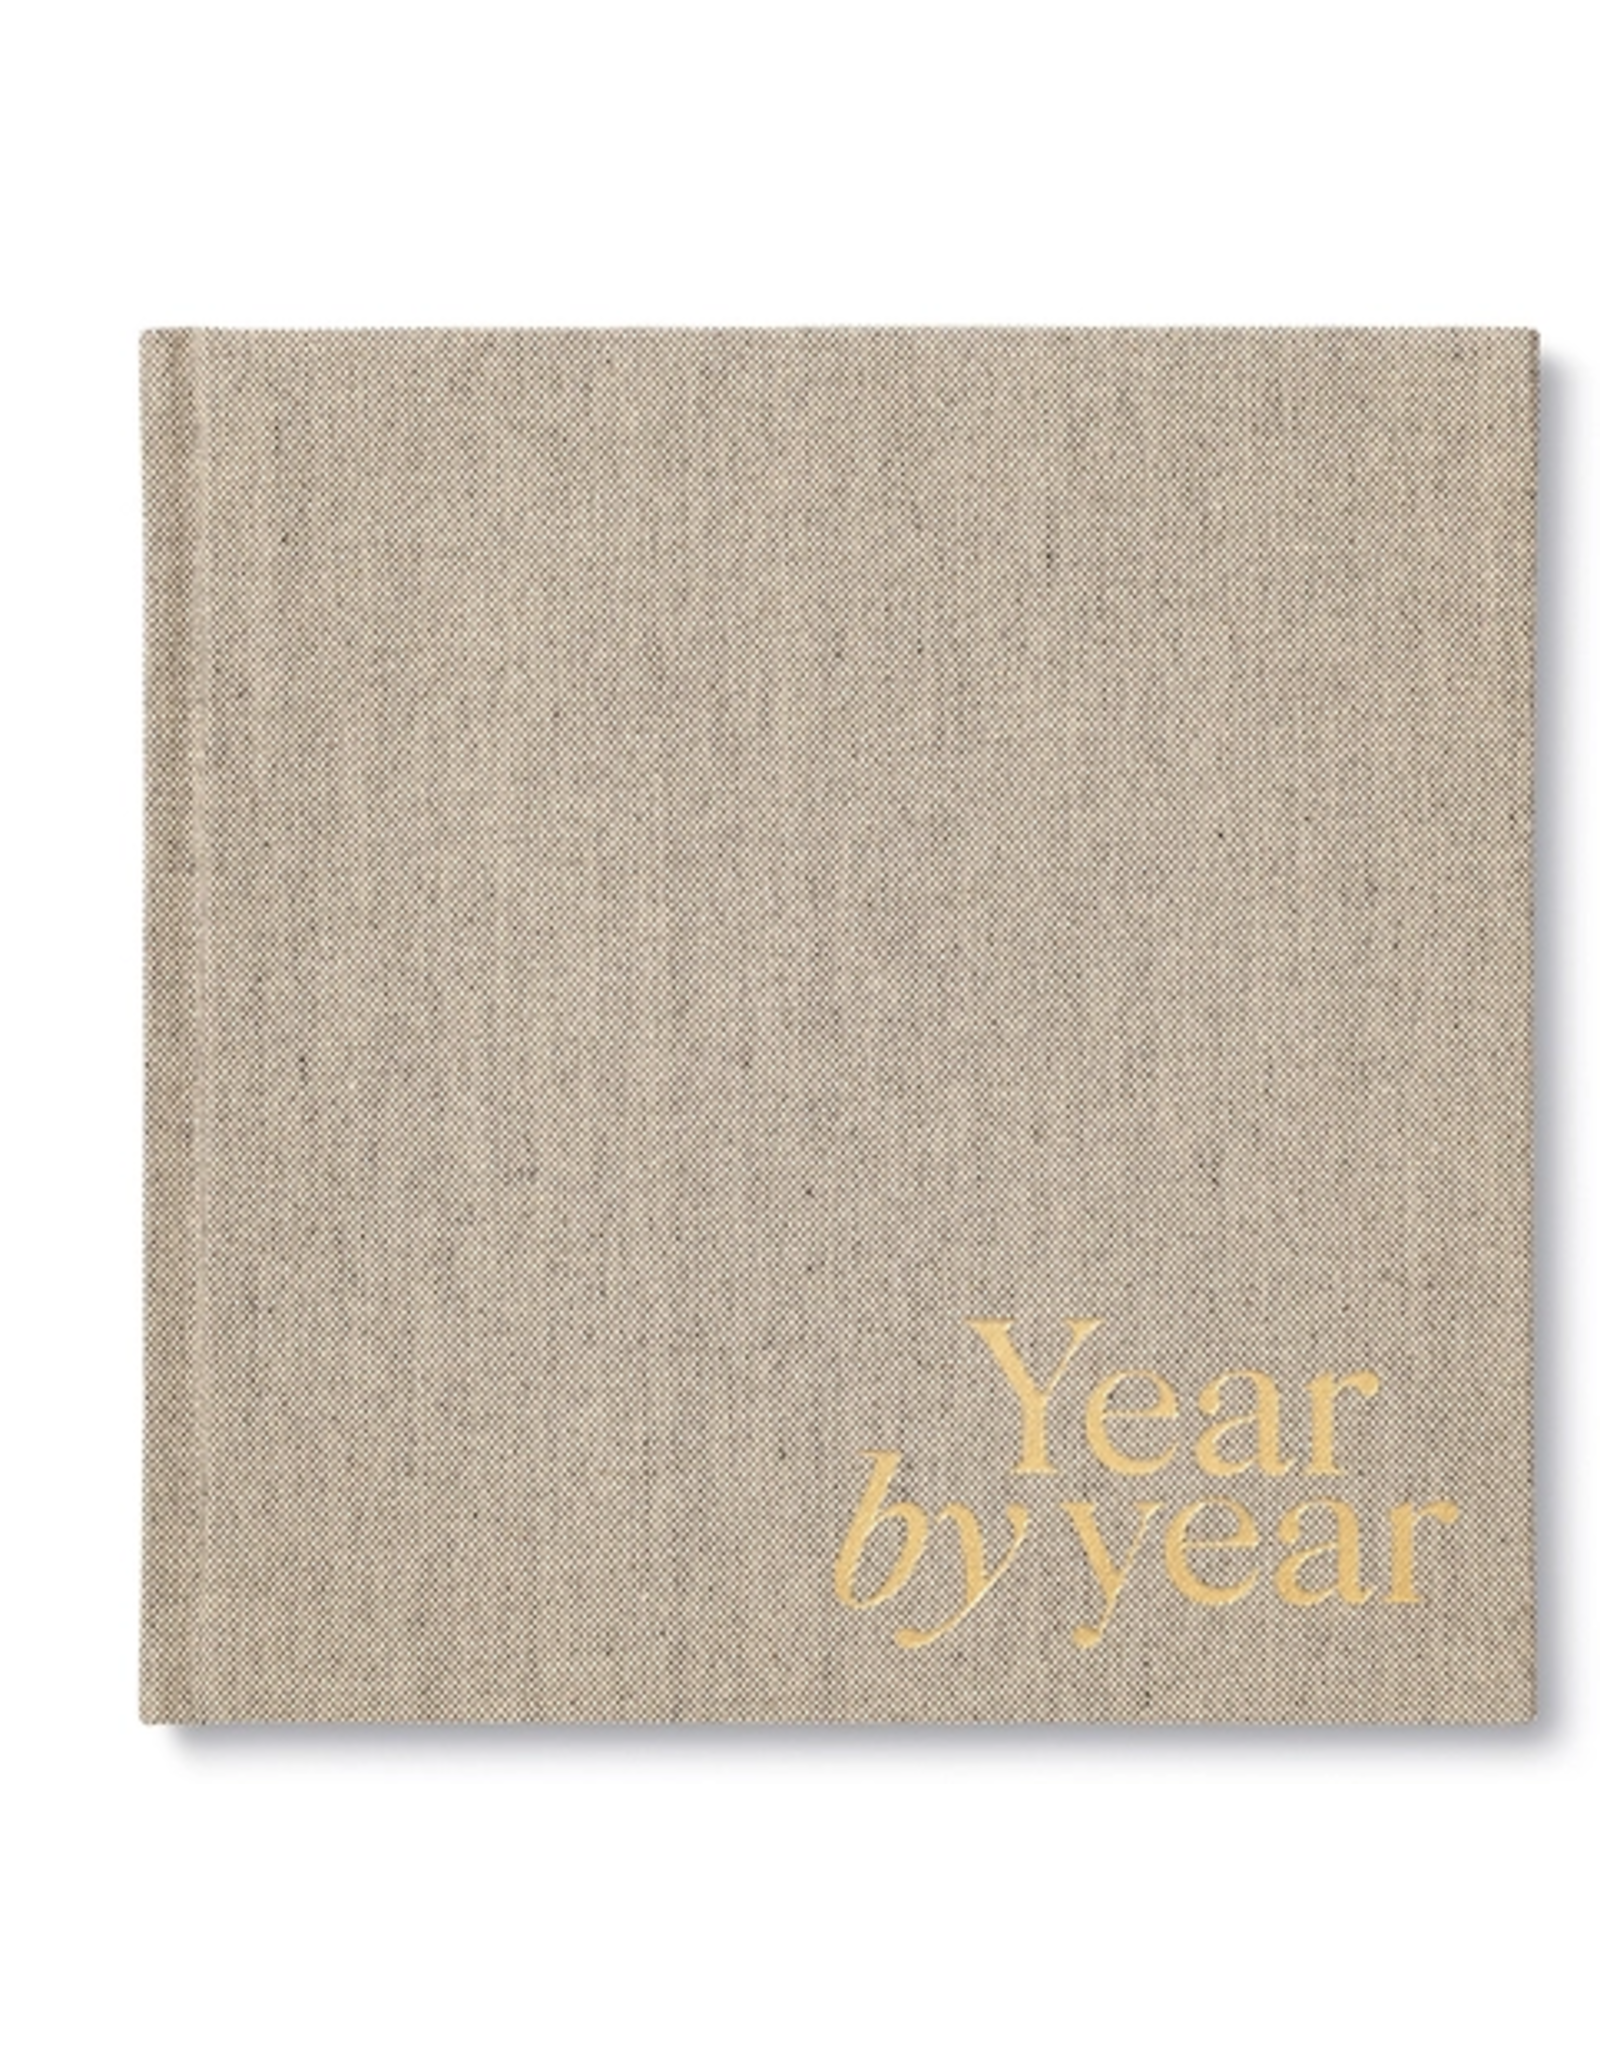 Compendium, Inc. Year by Year book